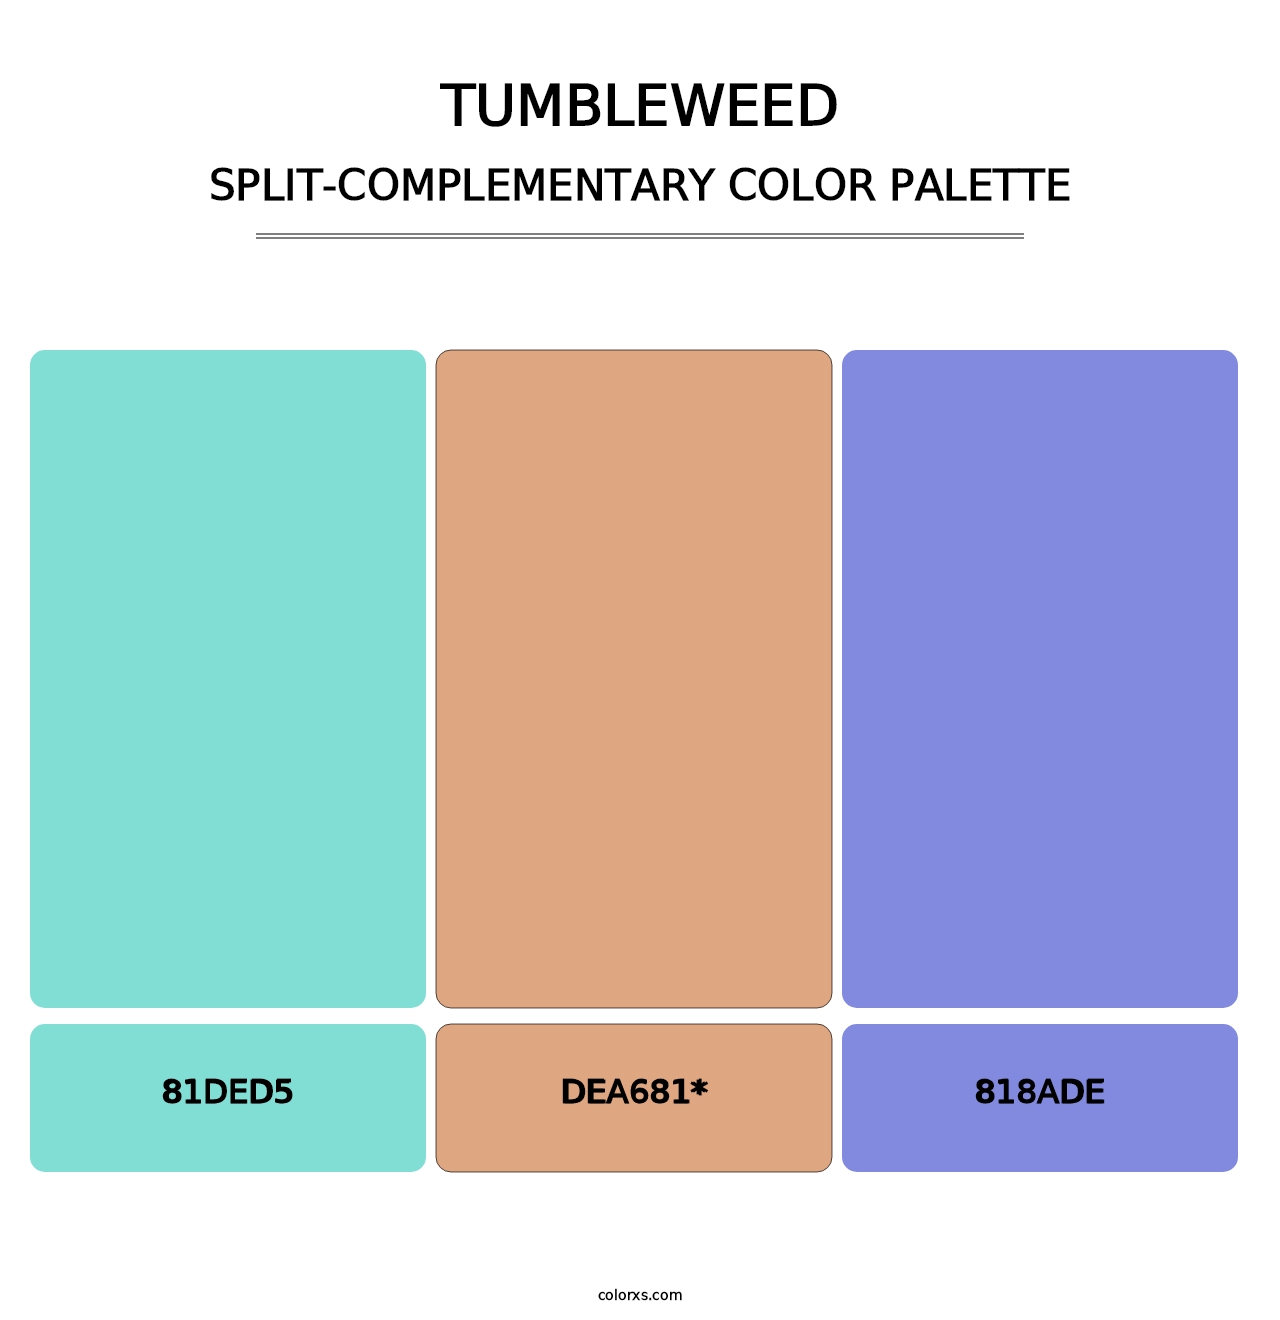 Tumbleweed - Split-Complementary Color Palette